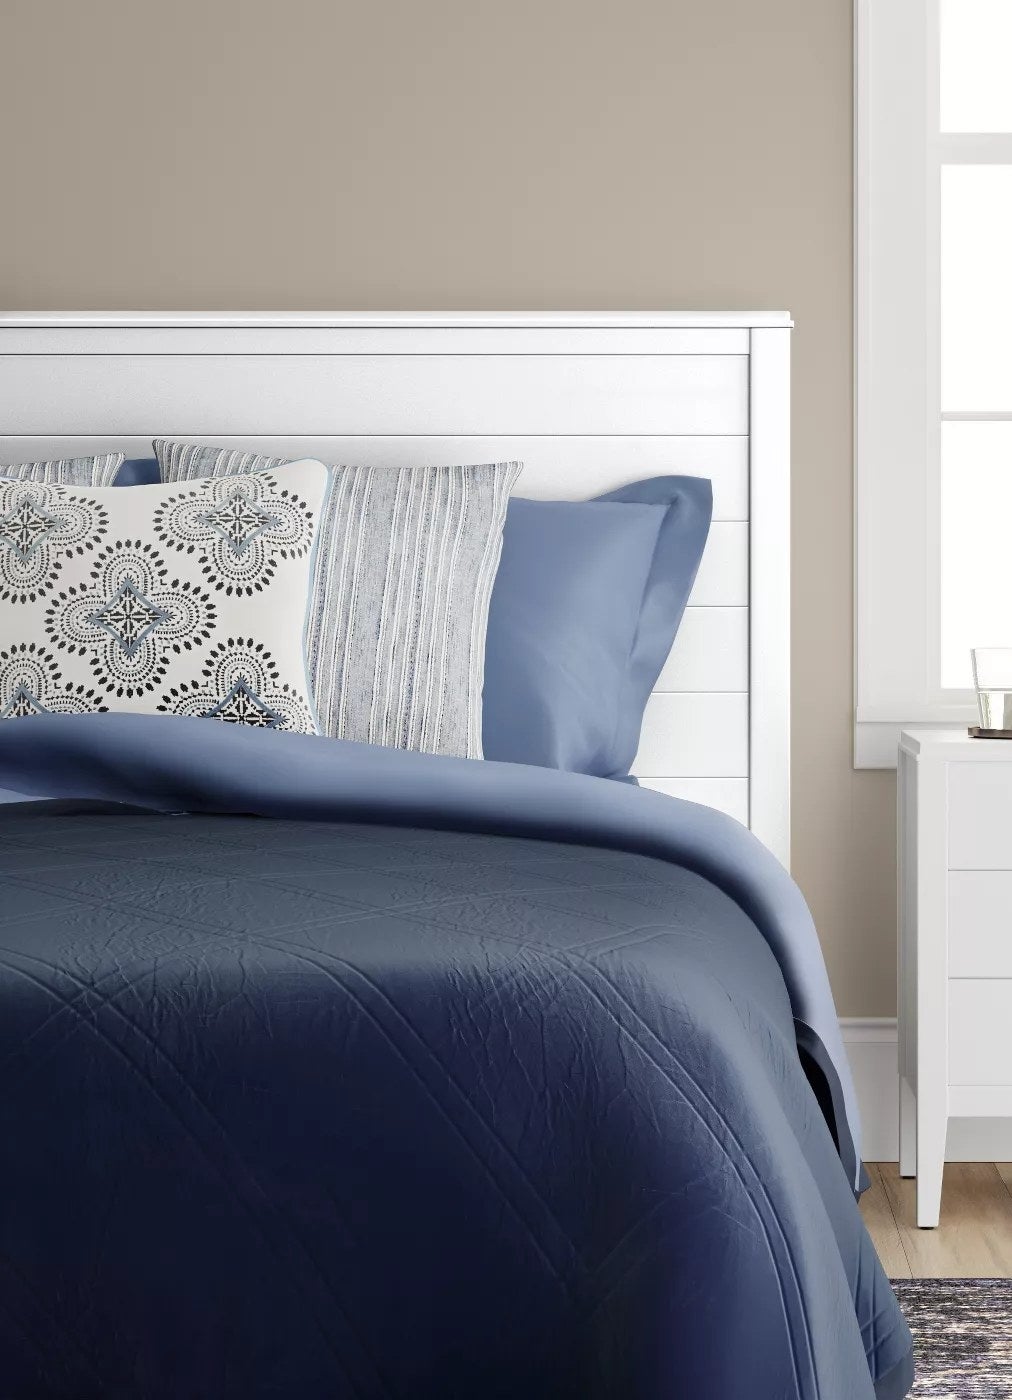 The headboard with horizontal lines on a bed